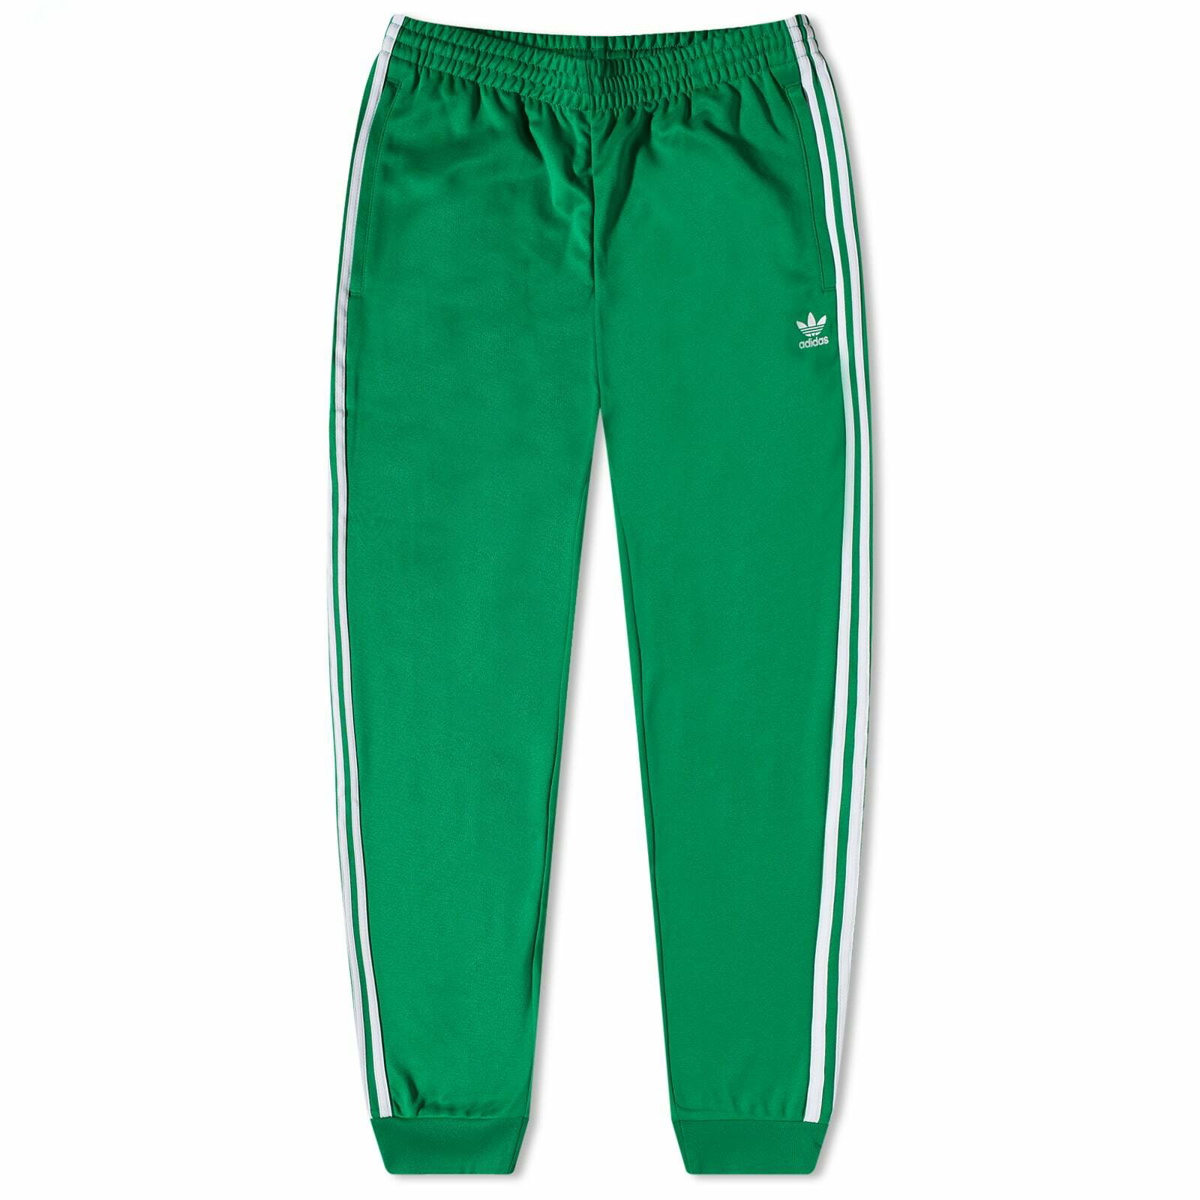 Adidas Men's Superstar Track Pant in Green/White adidas